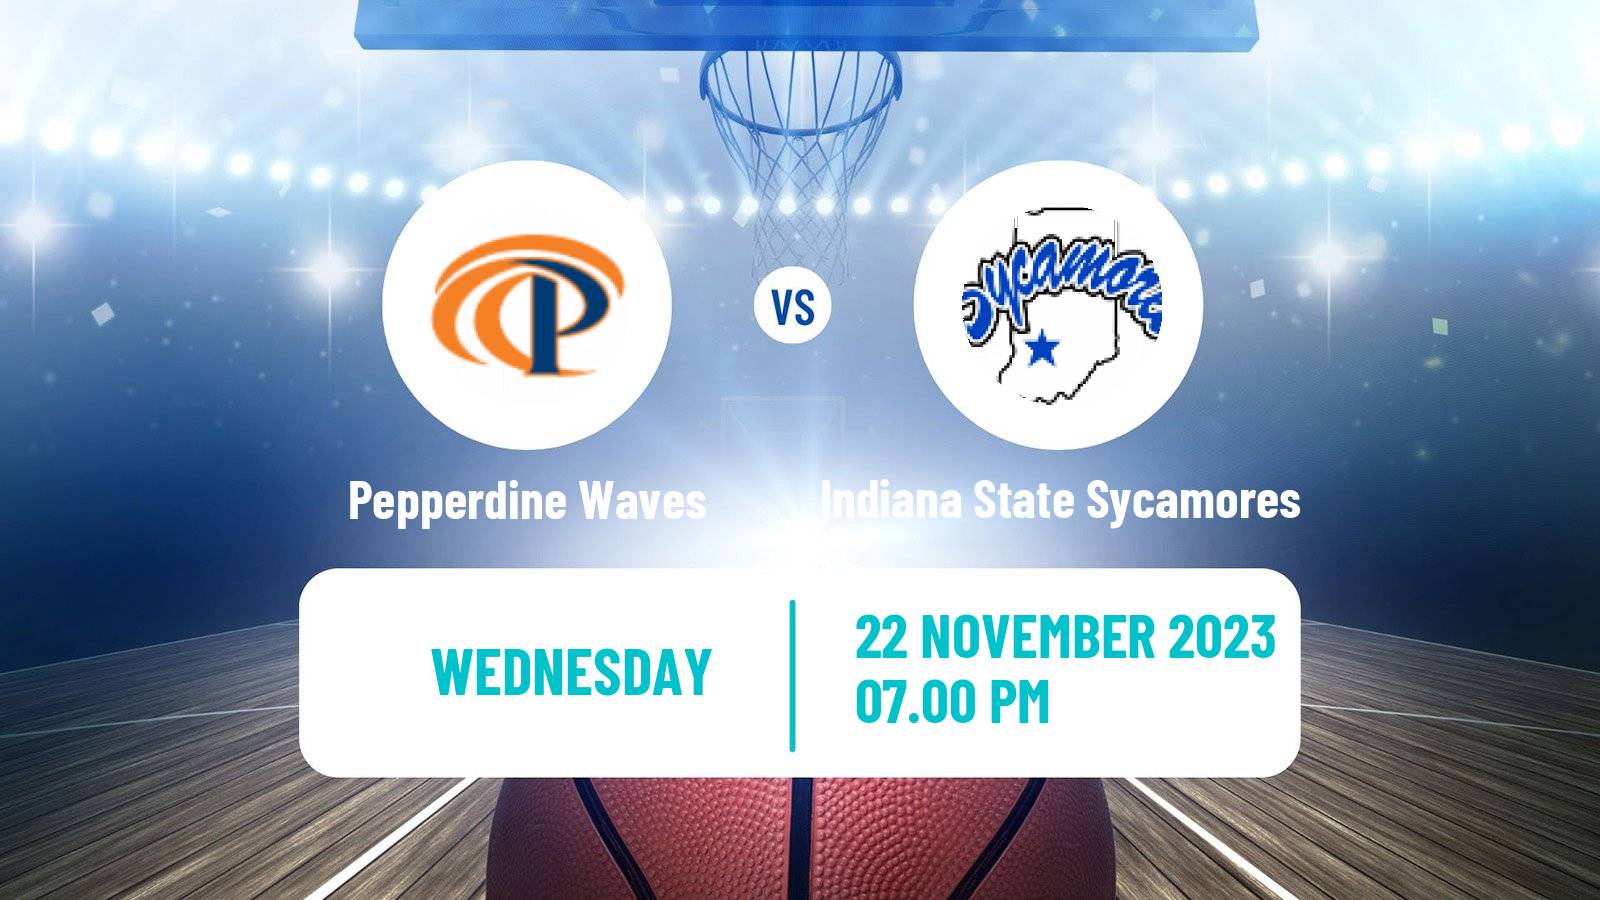 Basketball NCAA College Basketball Pepperdine Waves - Indiana State Sycamores